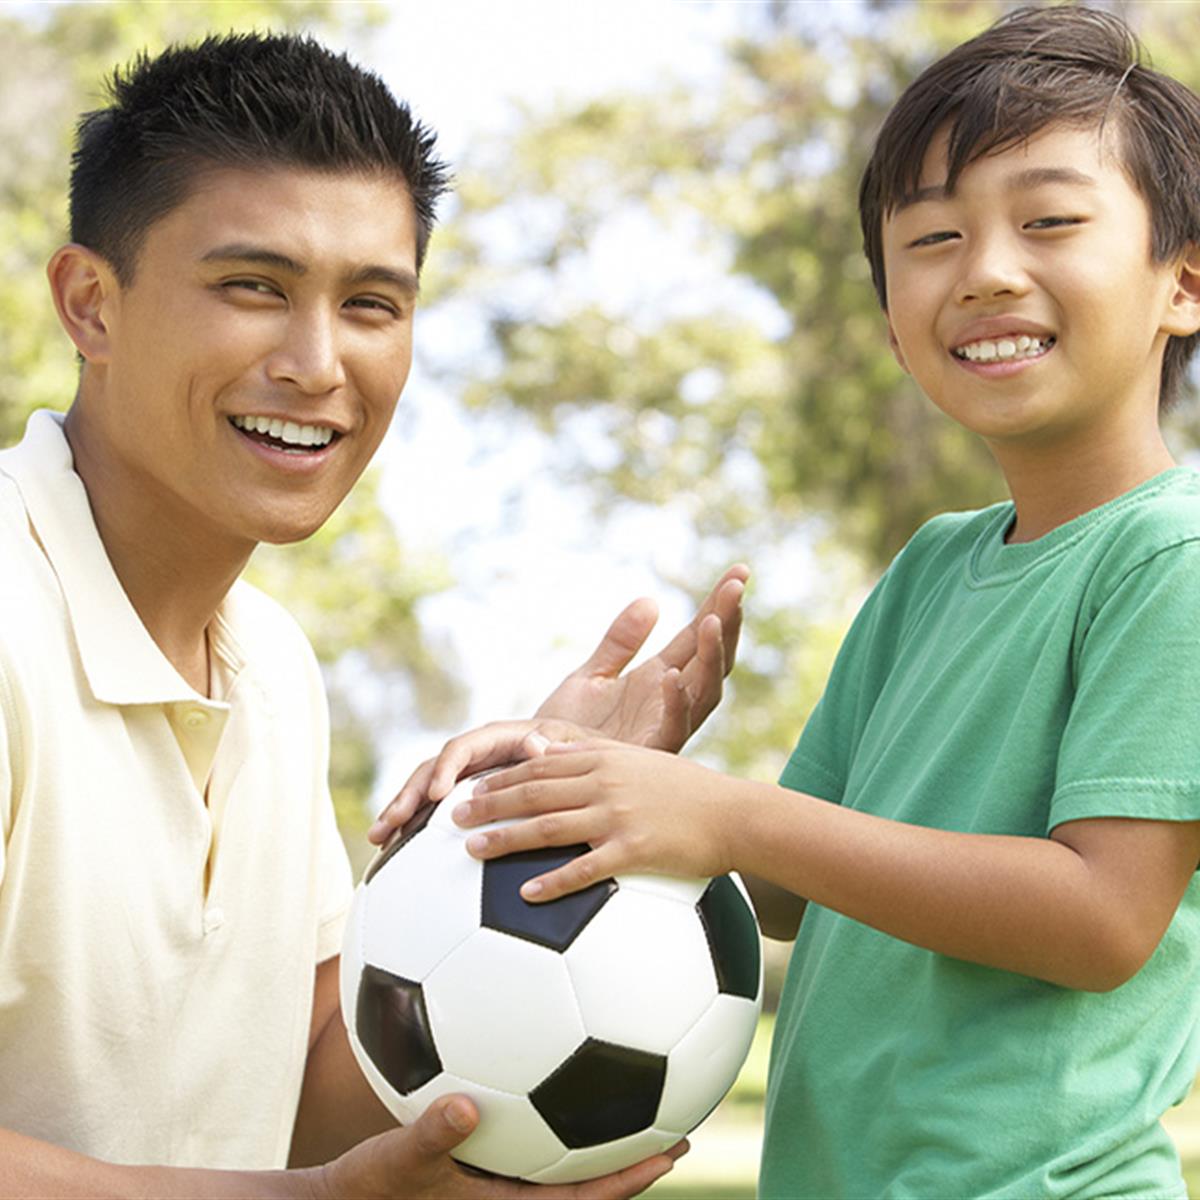 Playing Sports: Is it Right for Your Child?